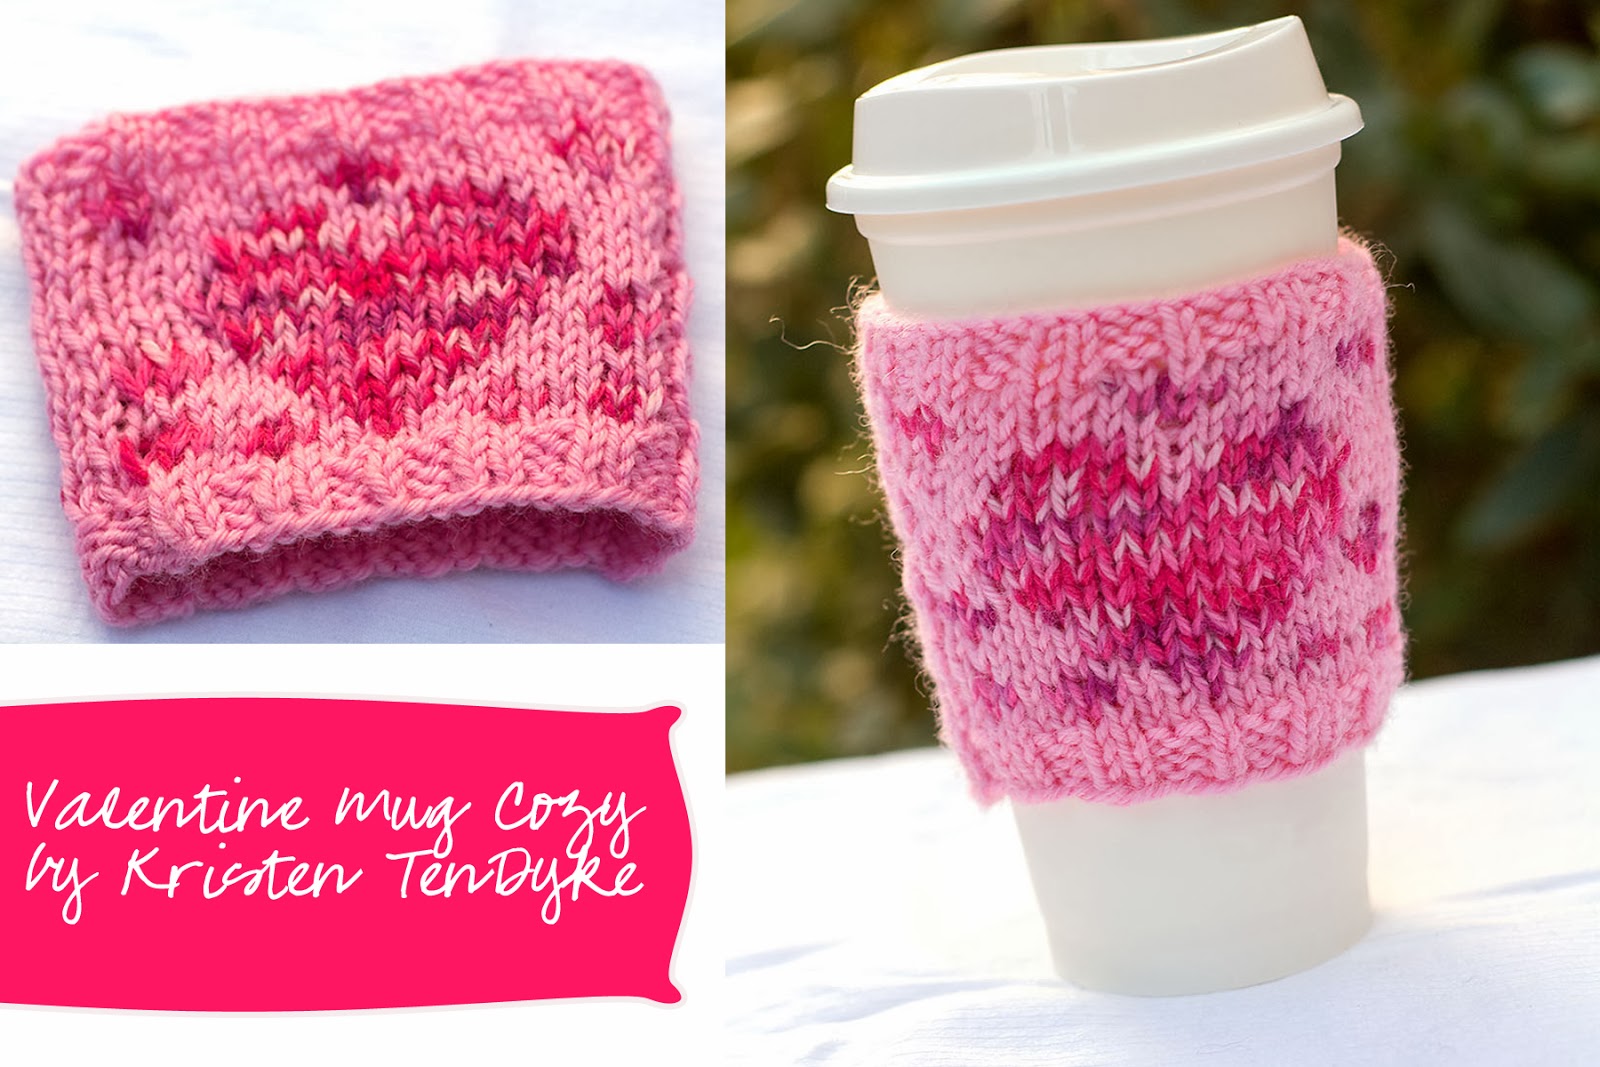 Click to see this project on Ravelry!